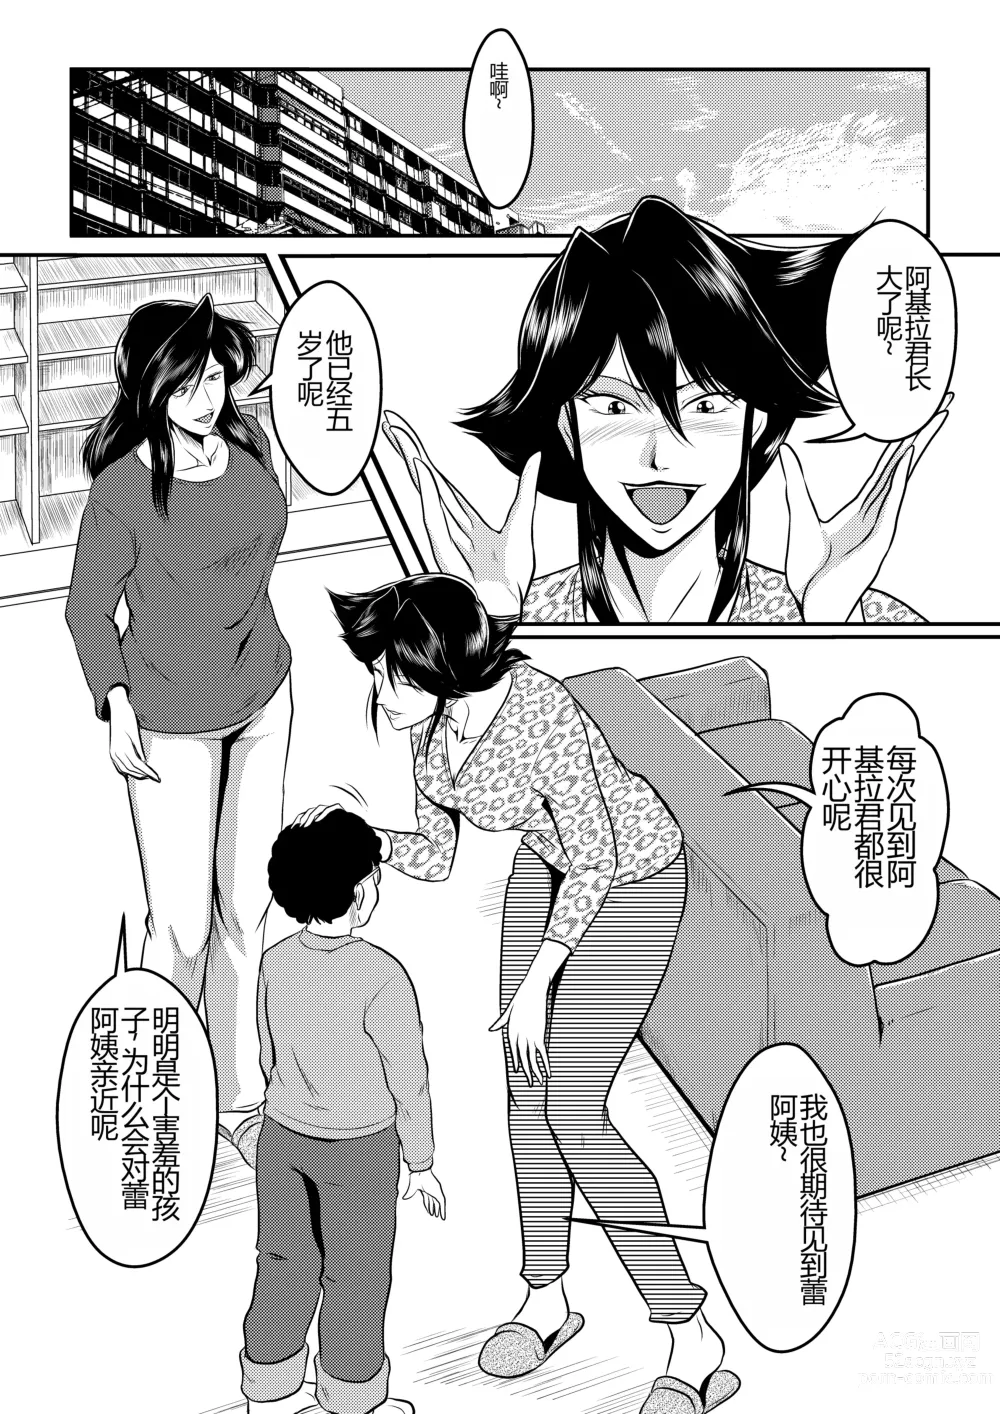 Page 4 of doujinshi Bitch & Slave & Another Slave ~ Bitch-san to Slave-san to Mou Hitori no Slave-san